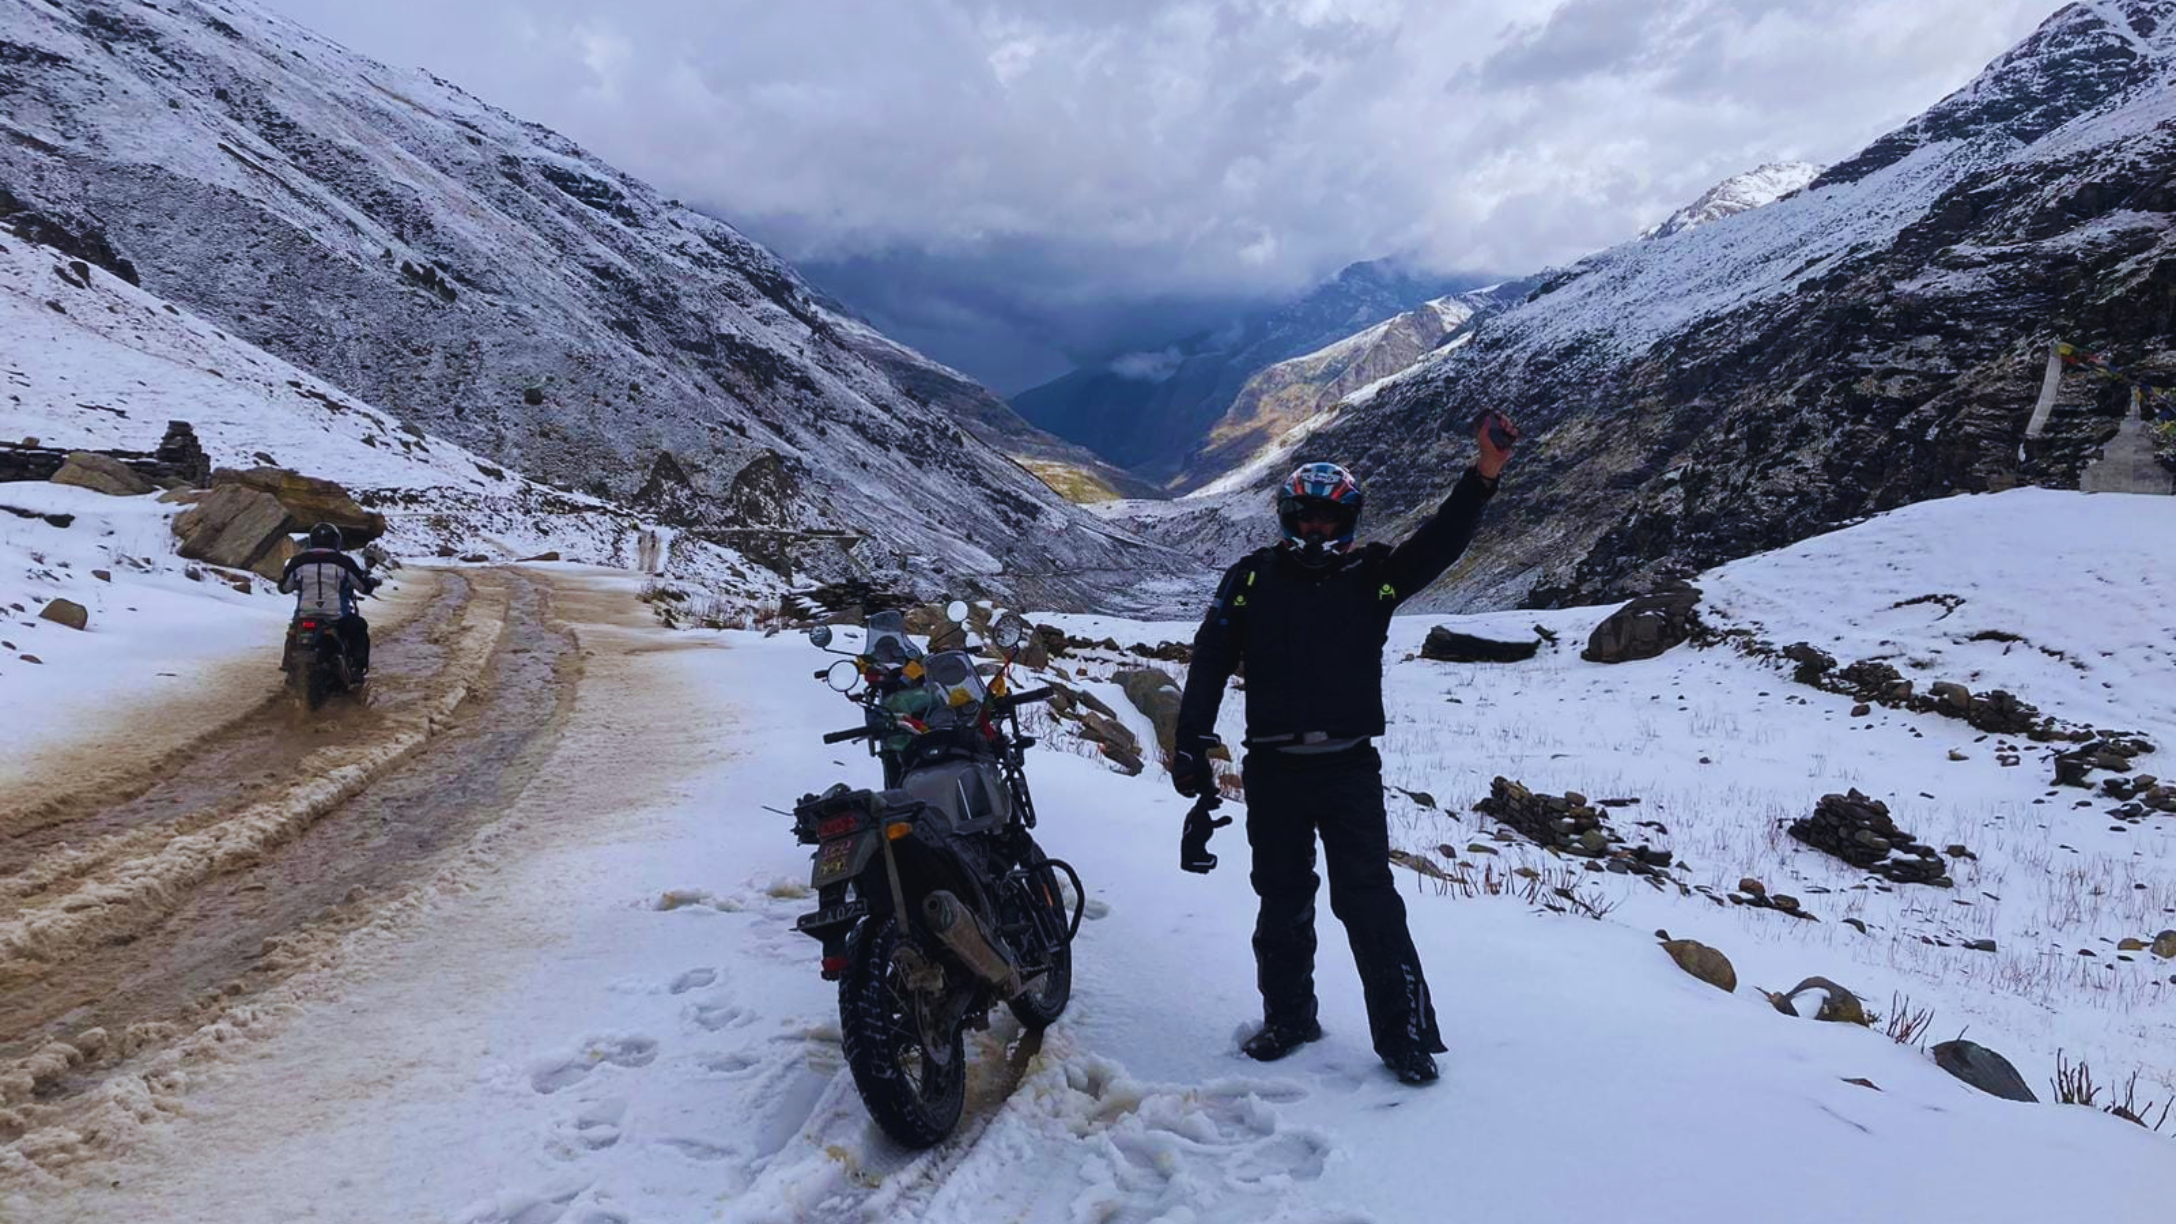 A Picture of Himalayan Motorcycle Tour by Ride The Himalayas